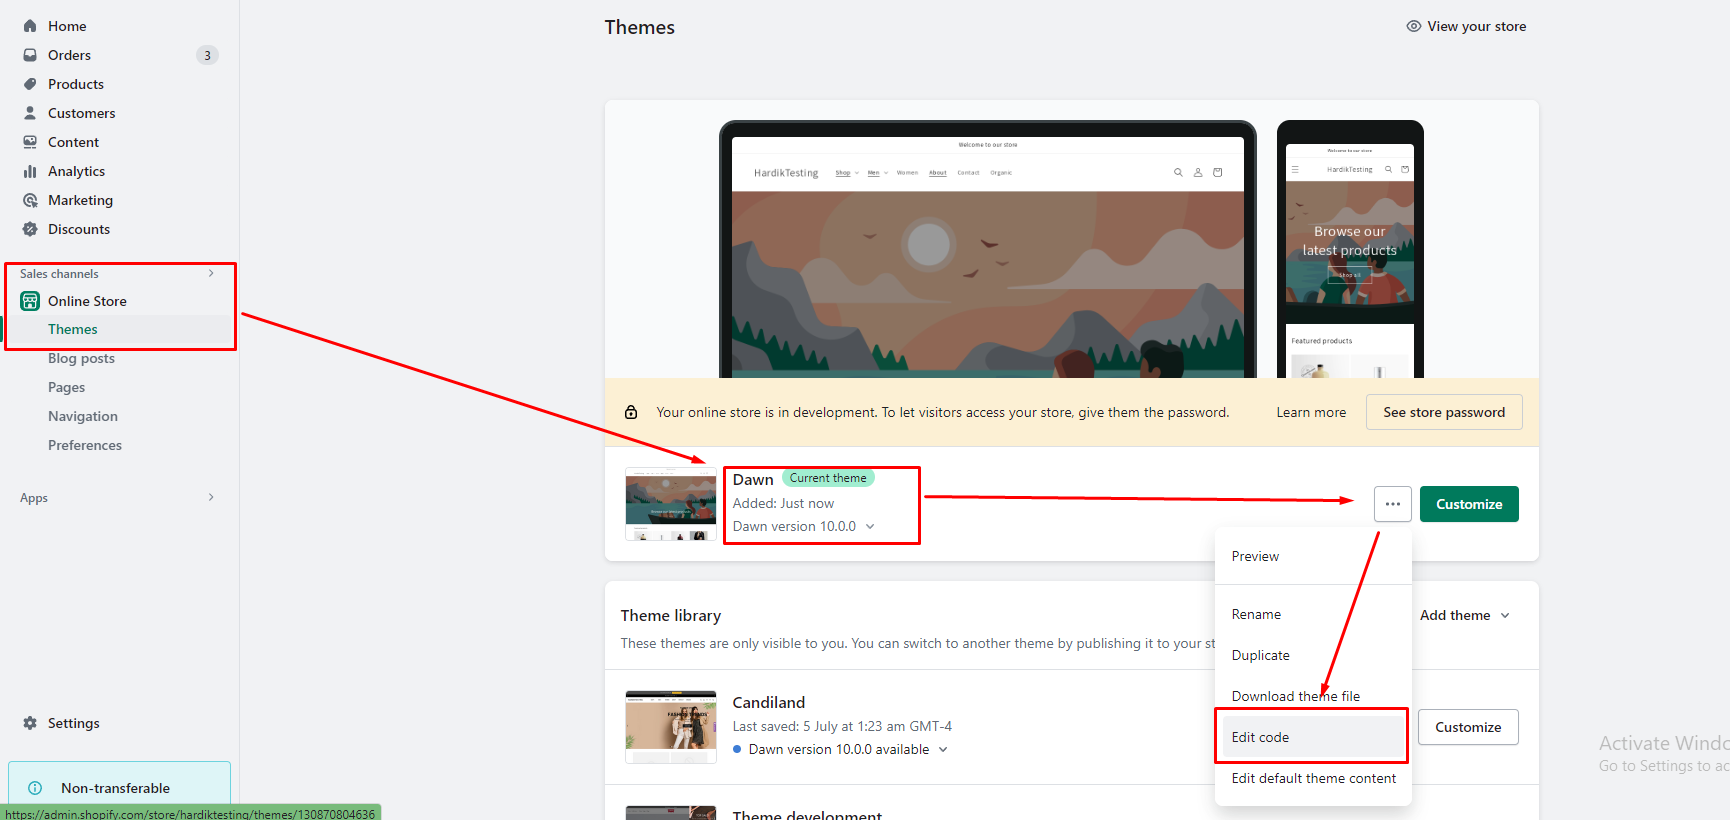 Image explaining how to go to themes editor